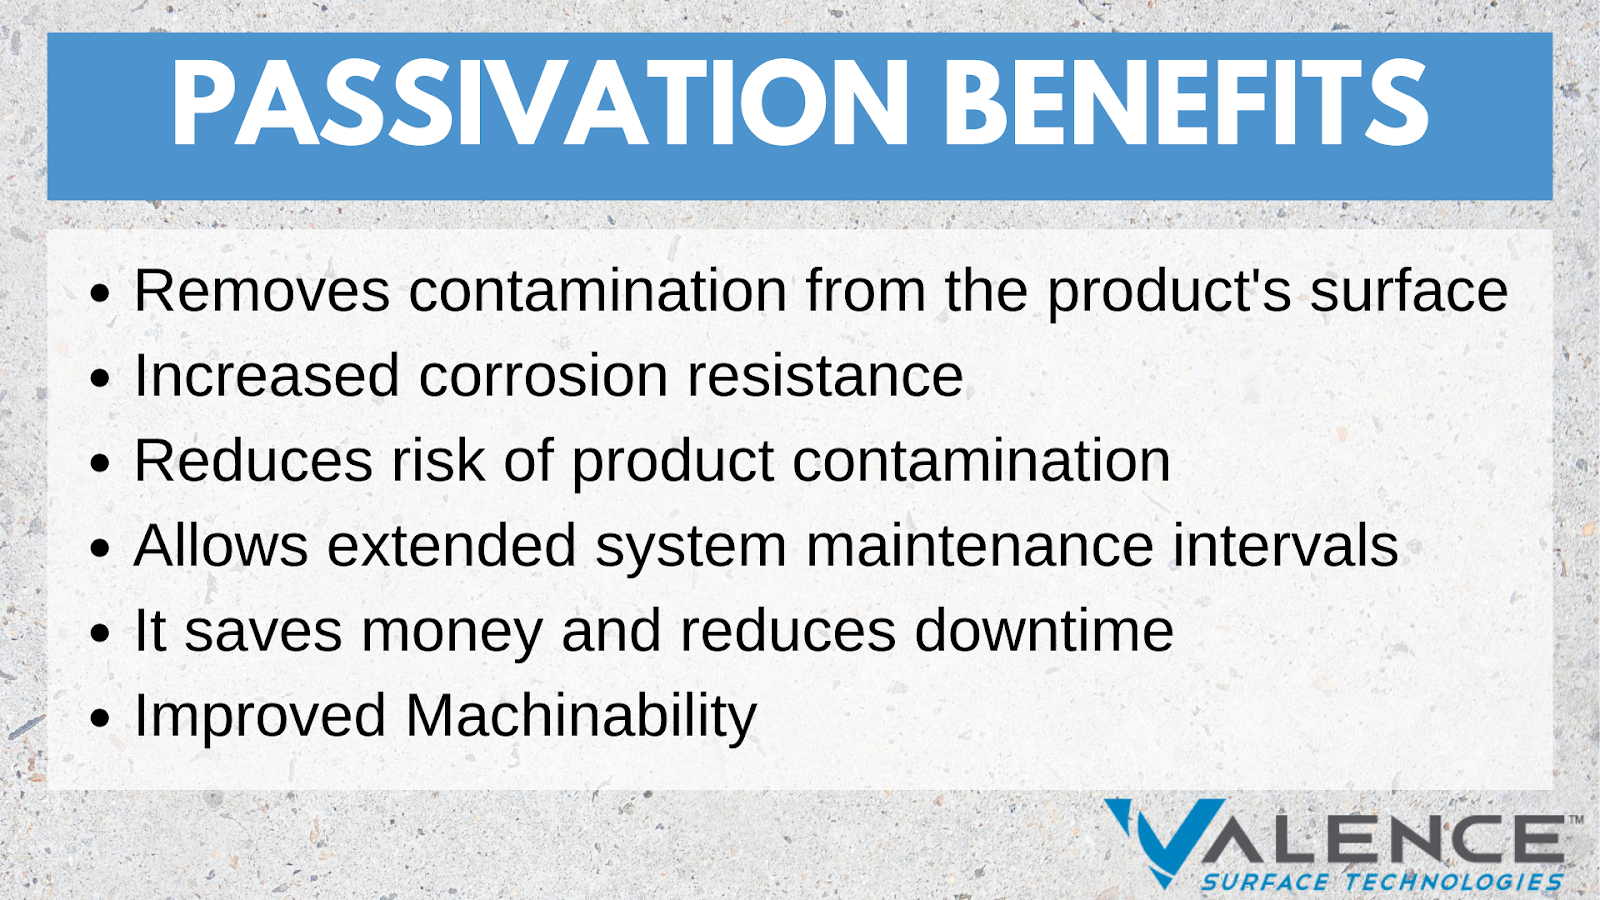 What is Passivation? How Does Stainless Steel Passivation Work?